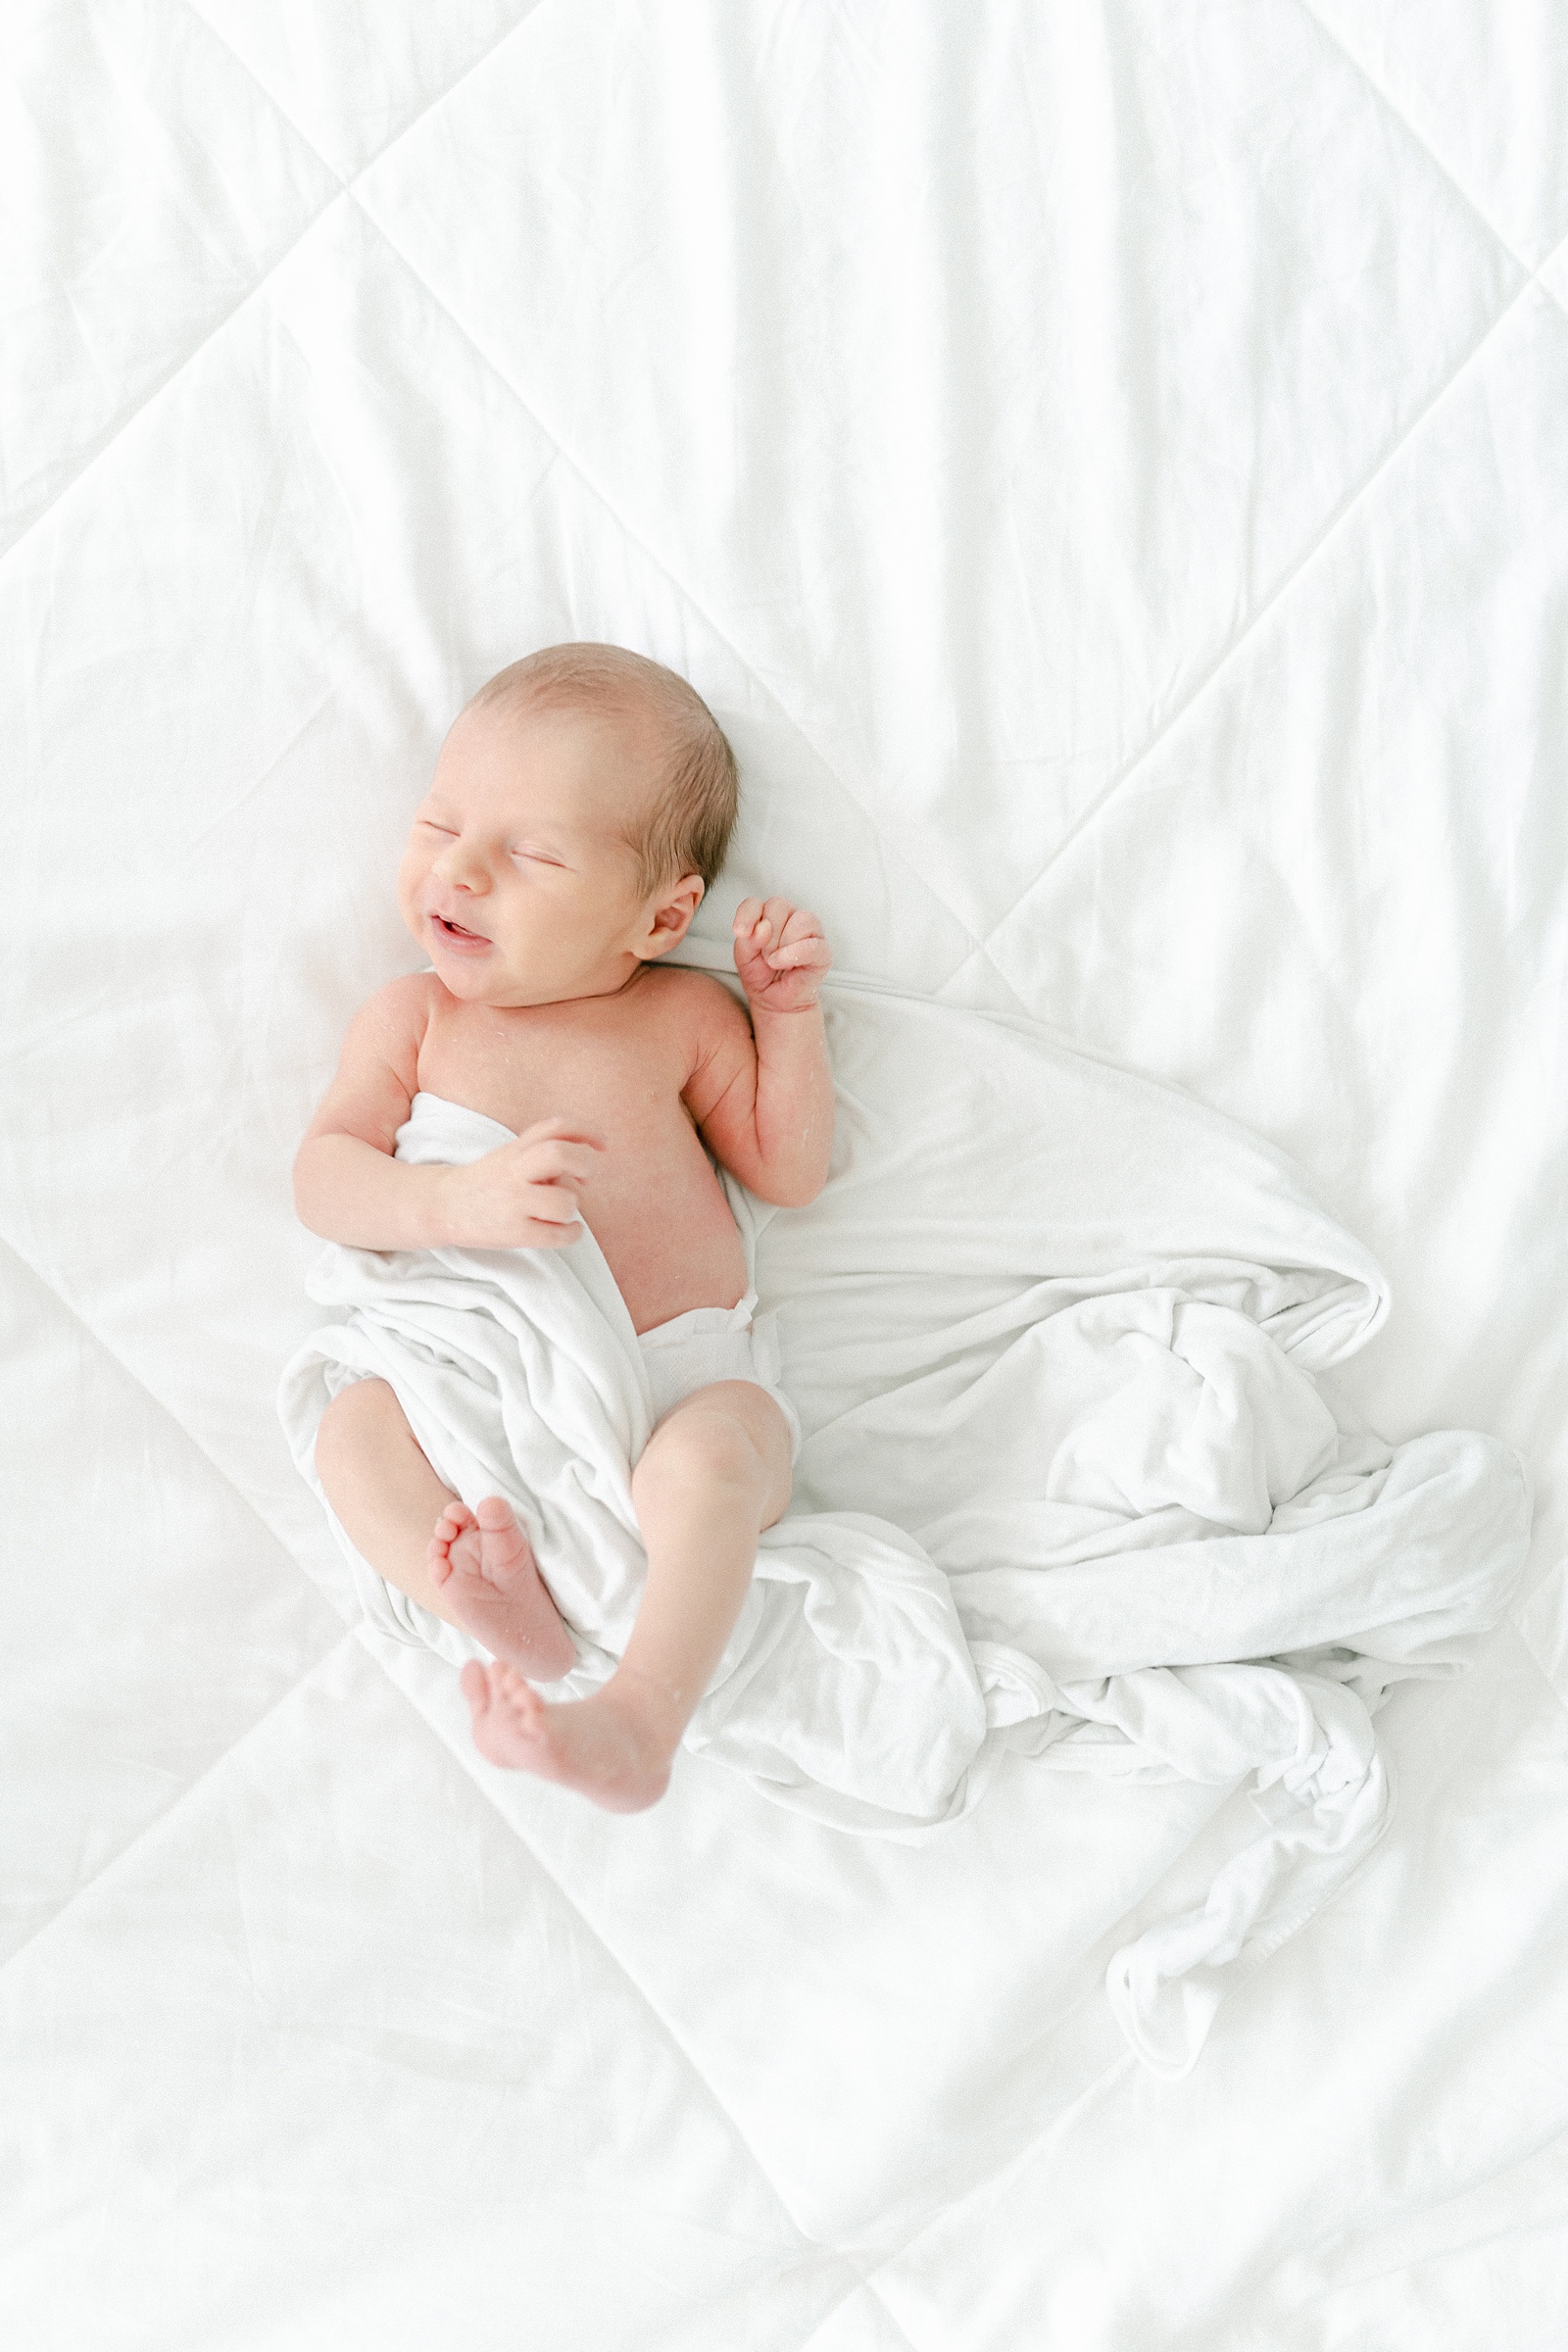 sweet baby boy in while blanket smiles slightly during Newborn portraits